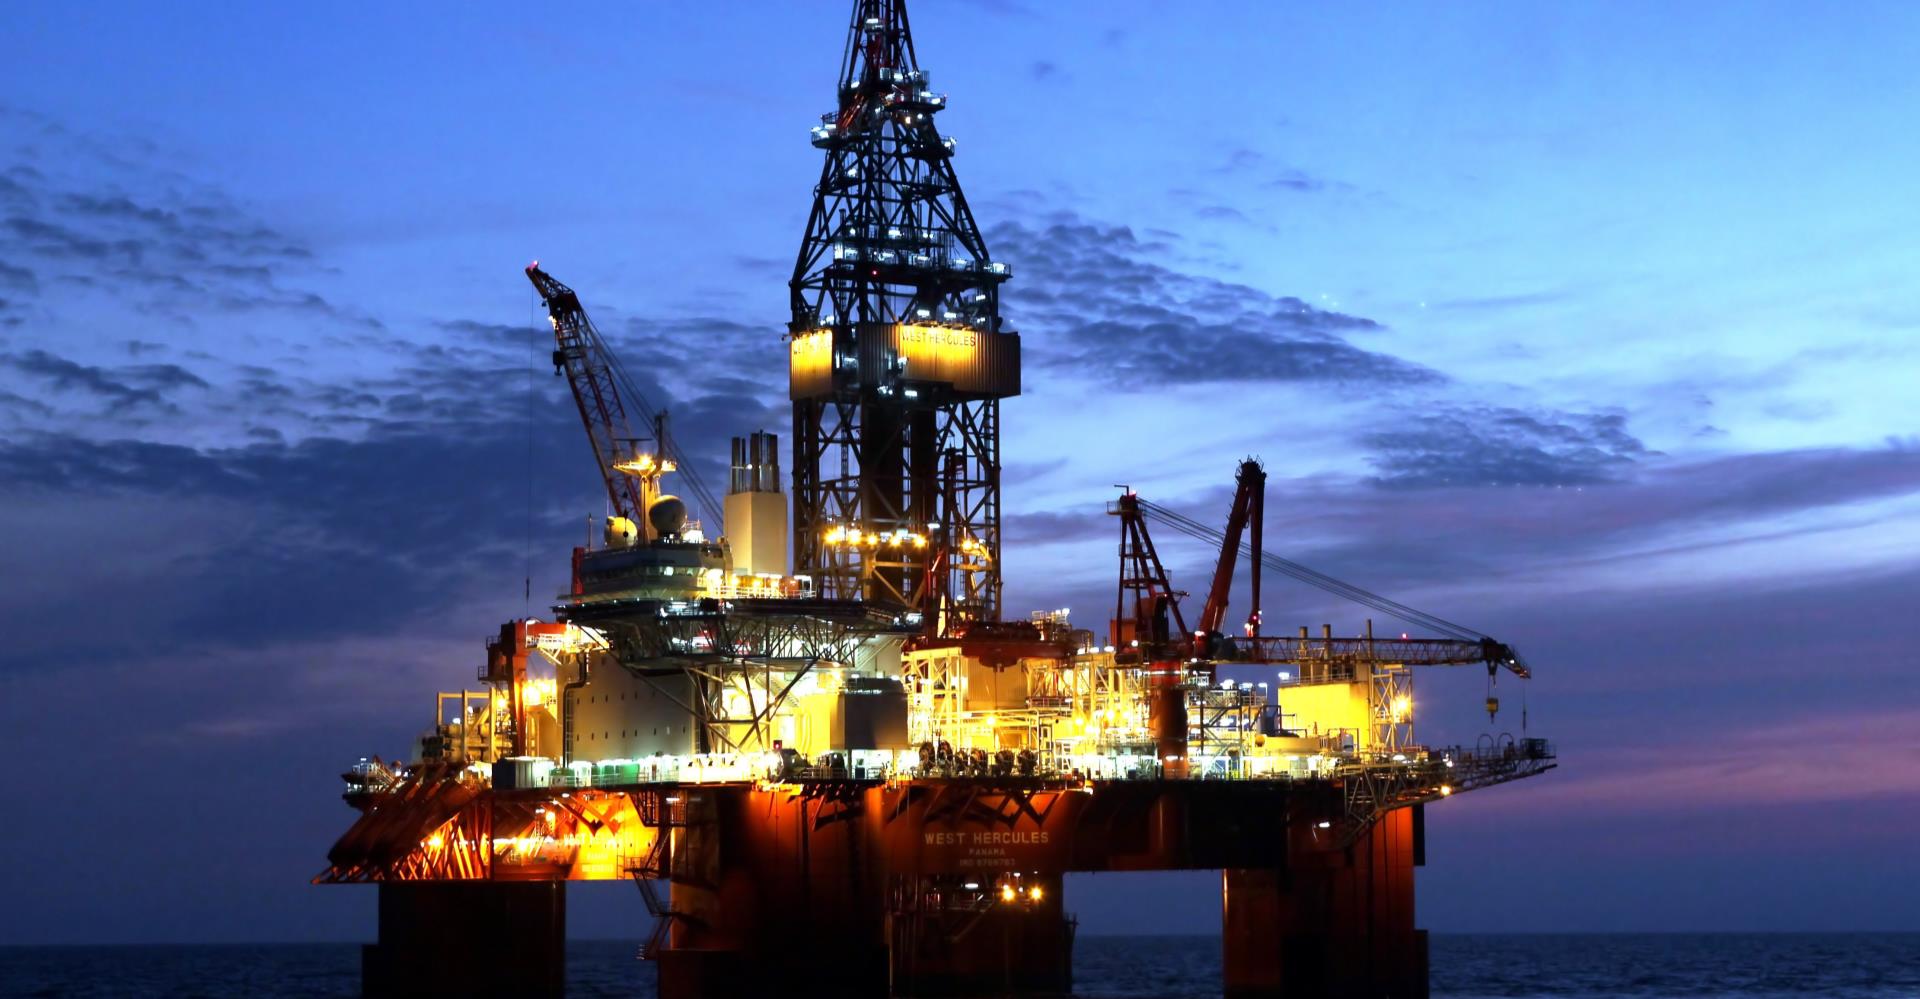 West Hercules rig will drill the wells for Equinor